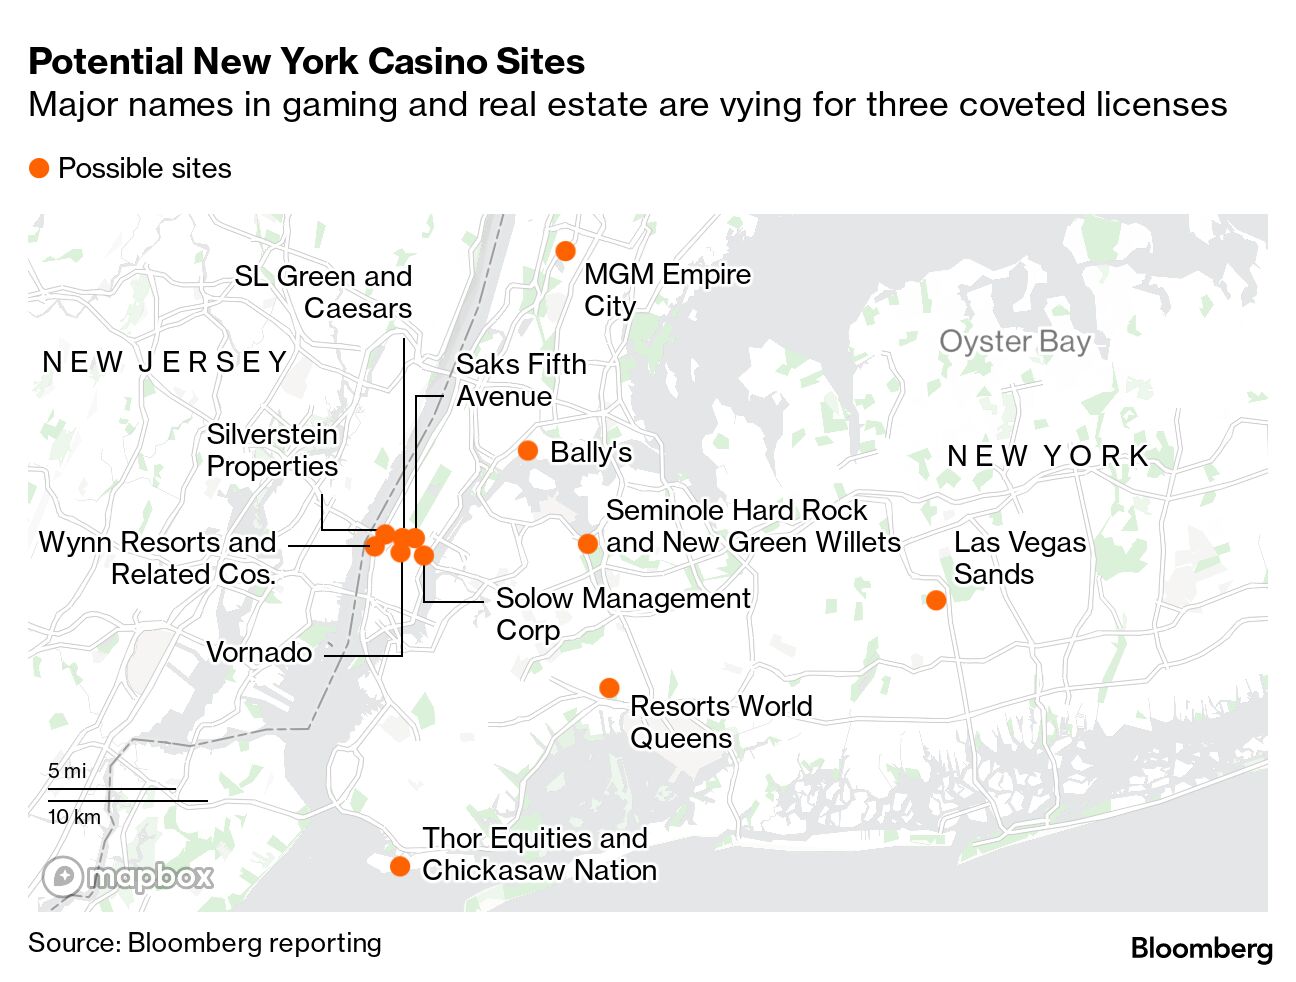 Mets Owner Steve Cohen Spends Big to Win New York City Casino License -  Bloomberg